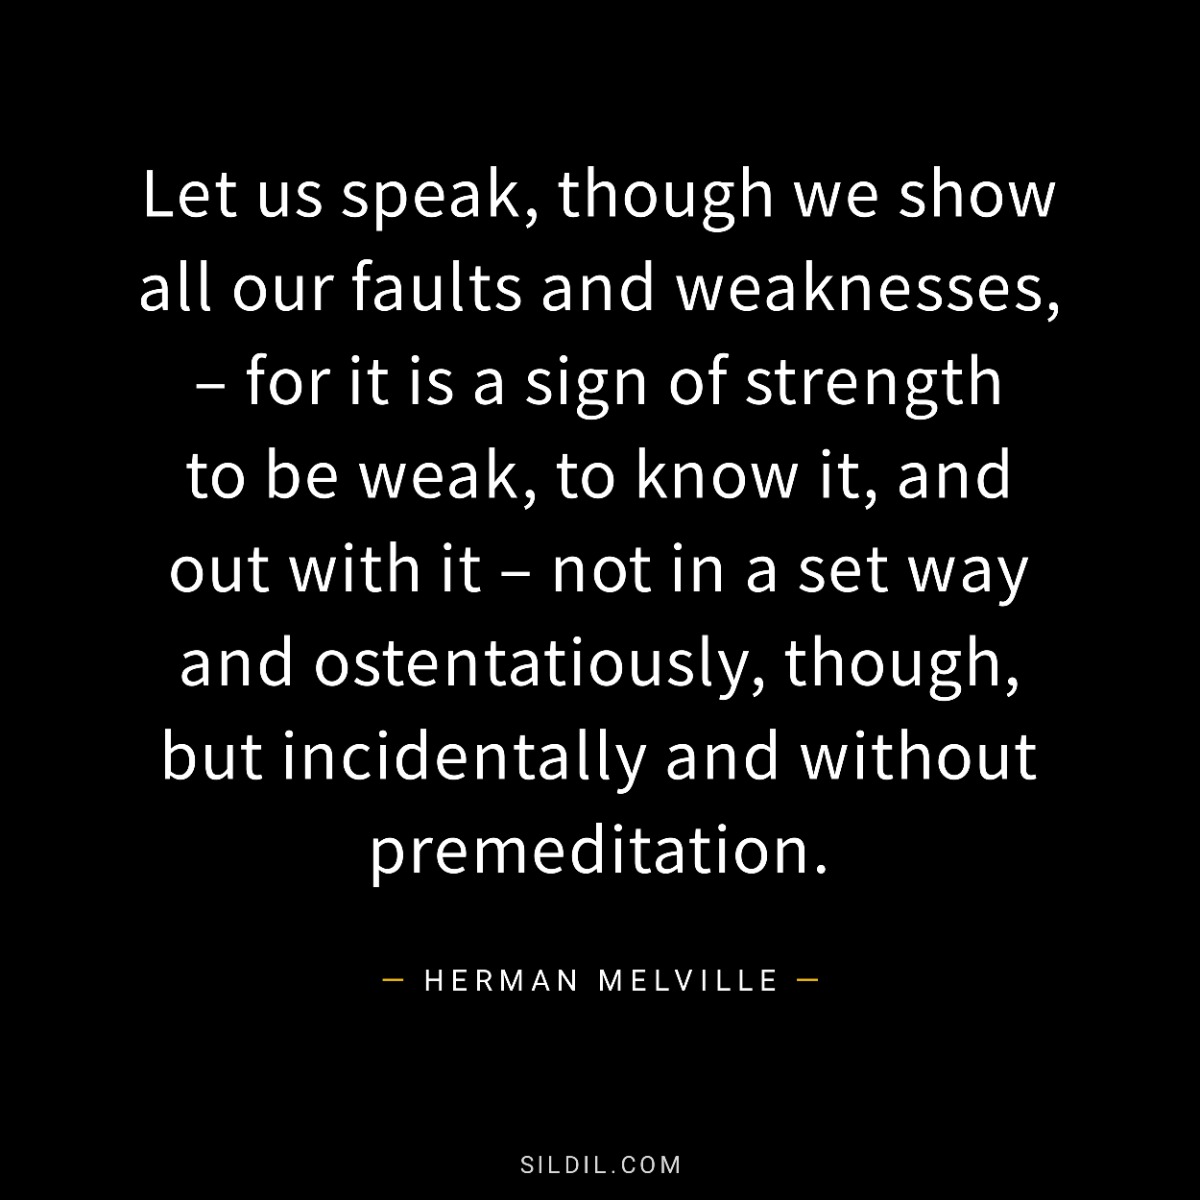 Let us speak, though we show all our faults and weaknesses, – for it is a sign of strength to be weak, to know it, and out with it – not in a set way and ostentatiously, though, but incidentally and without premeditation.